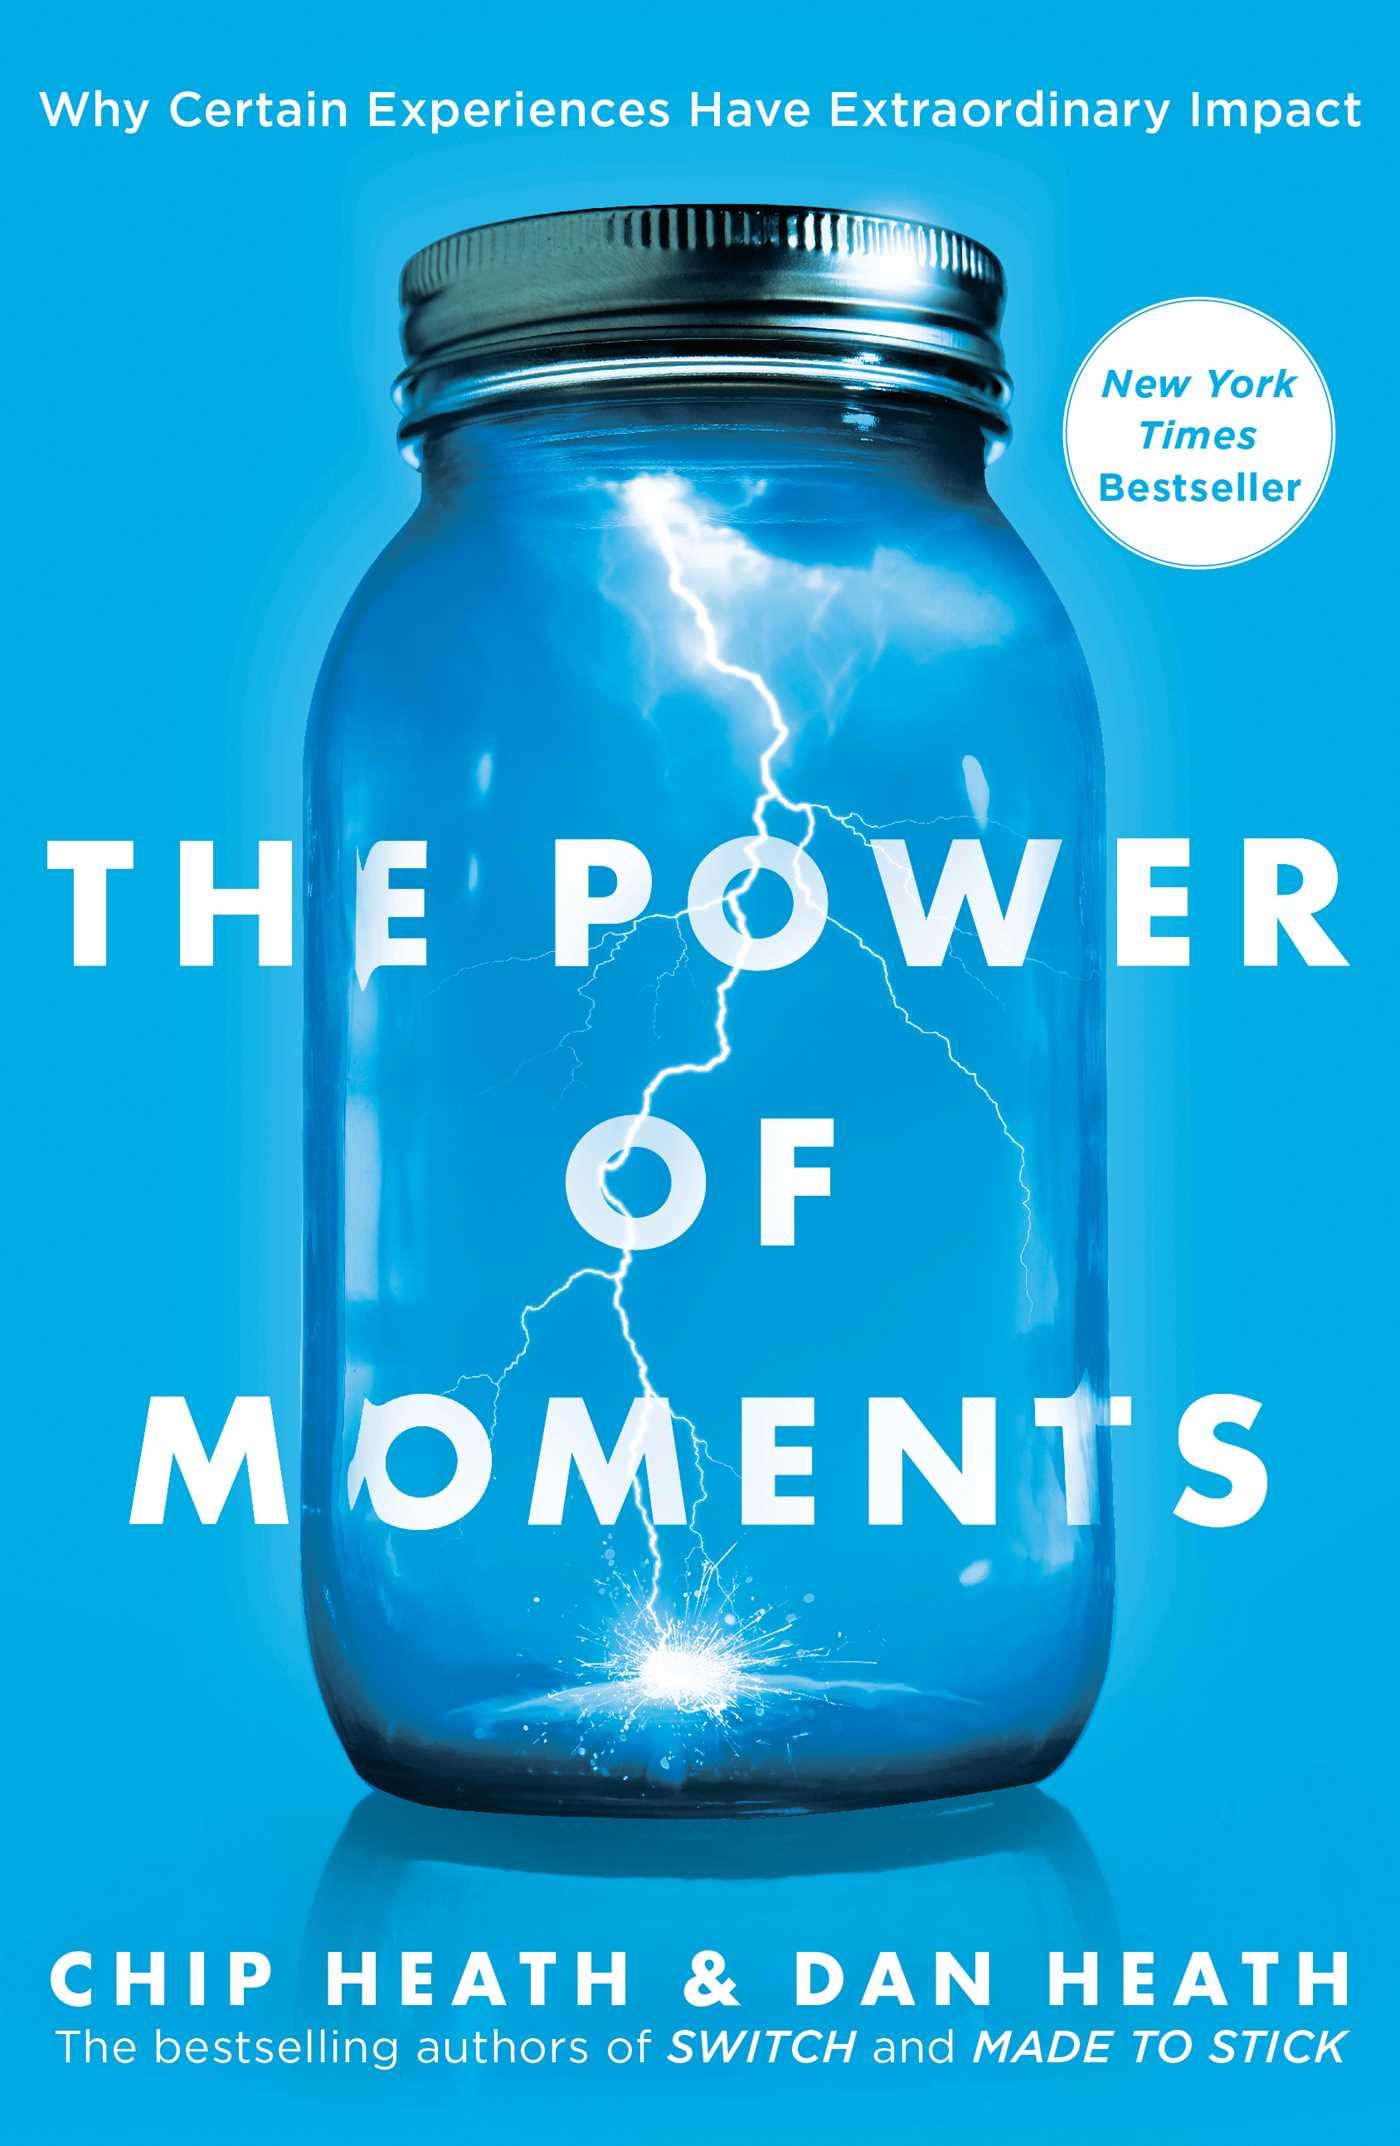 The book cover for The Power of Moments.